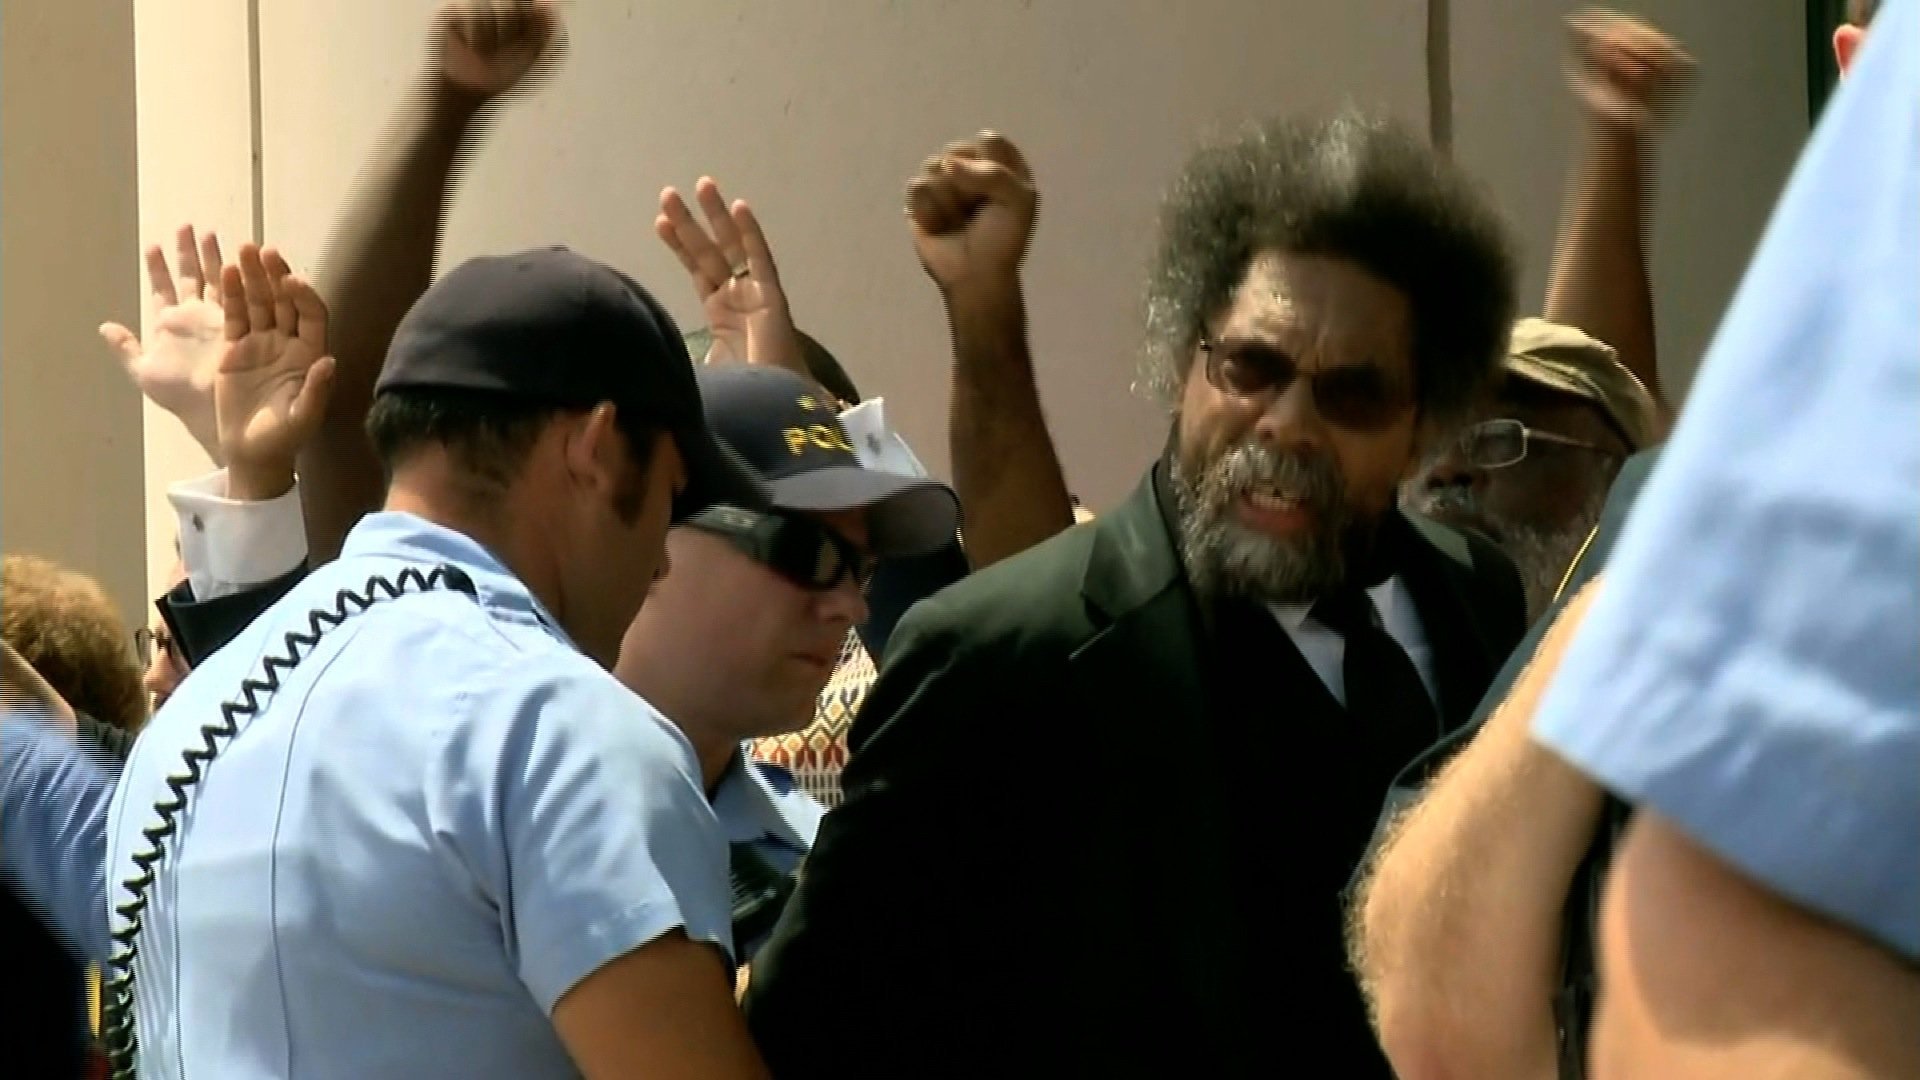 **Embargo: St. Louis, MO**

Peaceful protests outside Eagleton Courthouse leads to arrests including activist Cornel West.